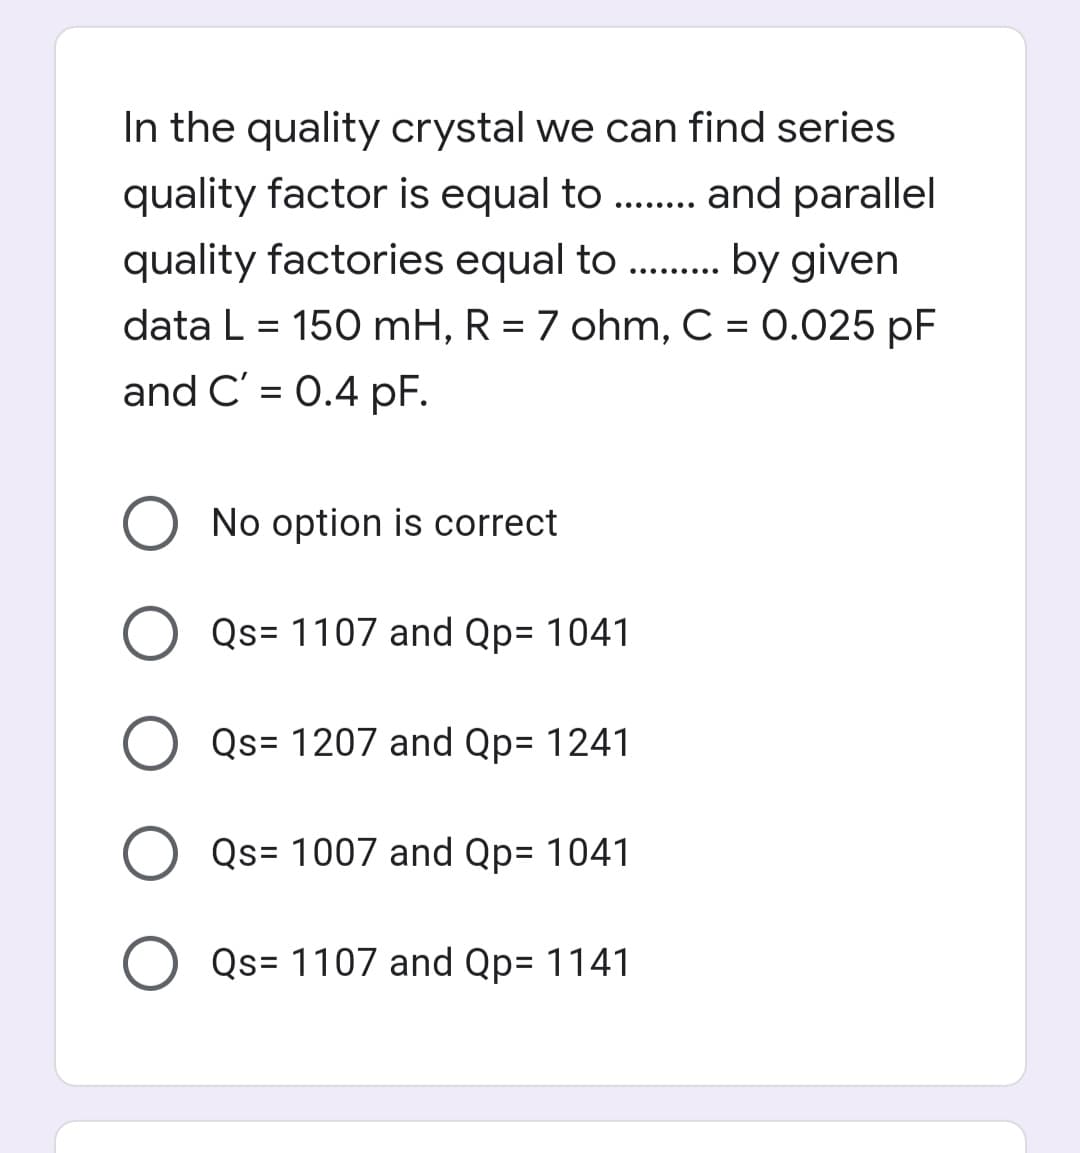 In the quality crystal we can find series
quality factor is equal to ..
and parallel
.... ....
quality factories equal to . . by given
..... ....
data L = 150 mH, R = 7 ohm, C = 0.025 pF
and C' = 0.4 pF.
%3D
O No option is correct
O Qs= 1107 and Qp= 1041
Qs= 1207 and Qp= 1241
Qs= 1007 and Qp= 1041
Qs= 1107 and Qp= 1141
